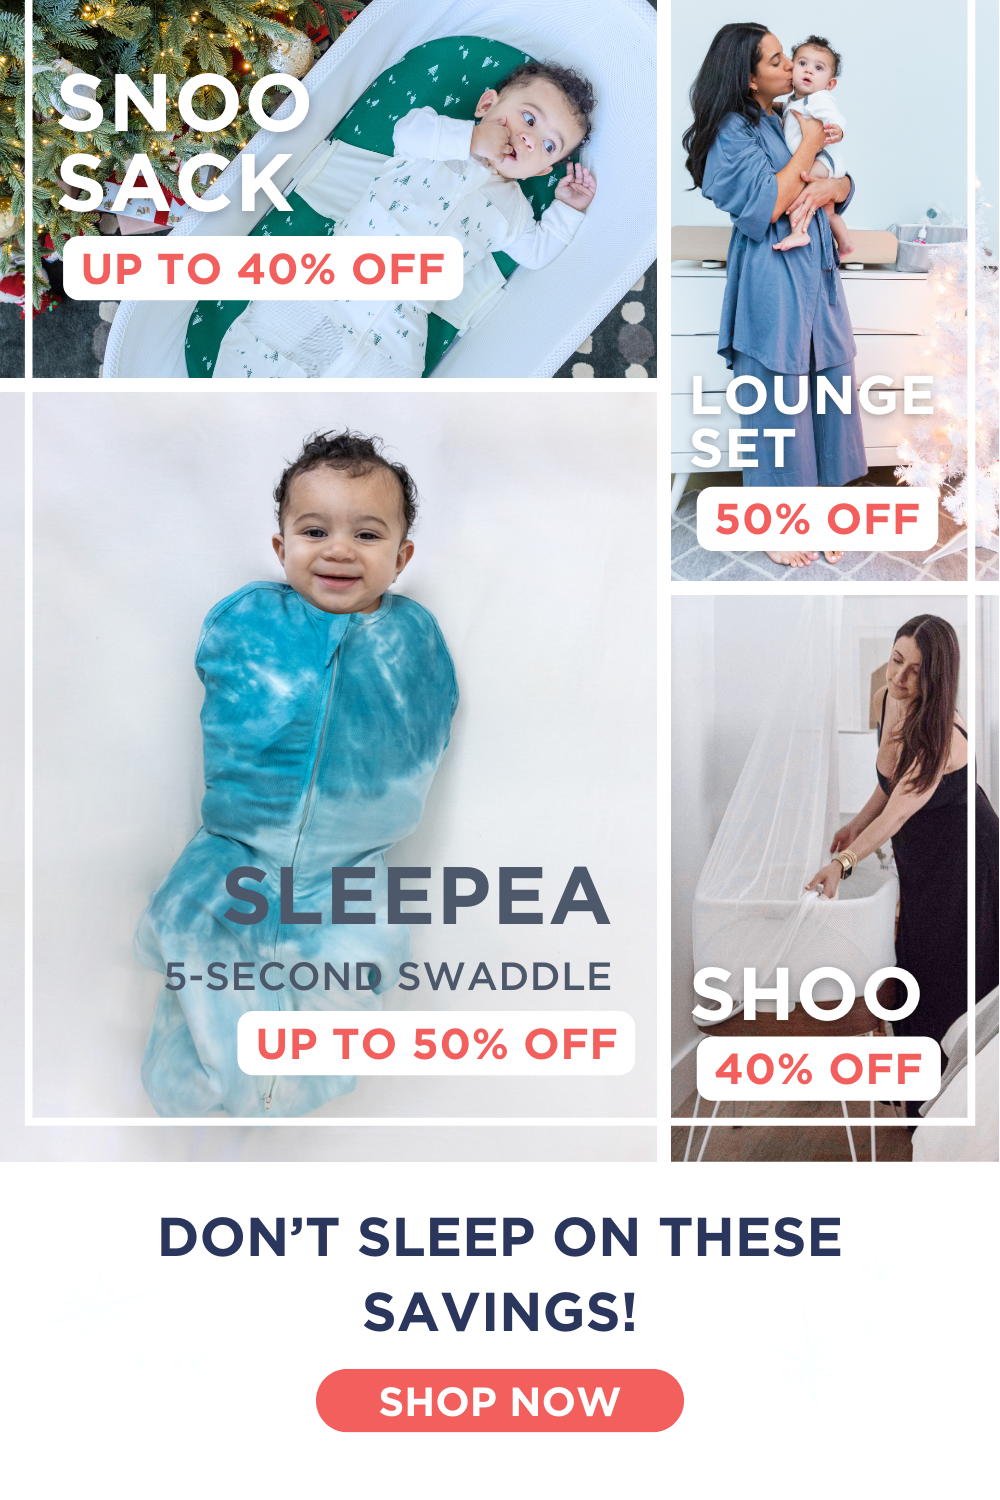 SNOO Sack Up To 40% Off. Sleepea 5-Second Swaddle Up To 50% Off. Lounge Set 50% Off. Shoo 40% Off. Don't Sleep On These Savings! SHOP NOW